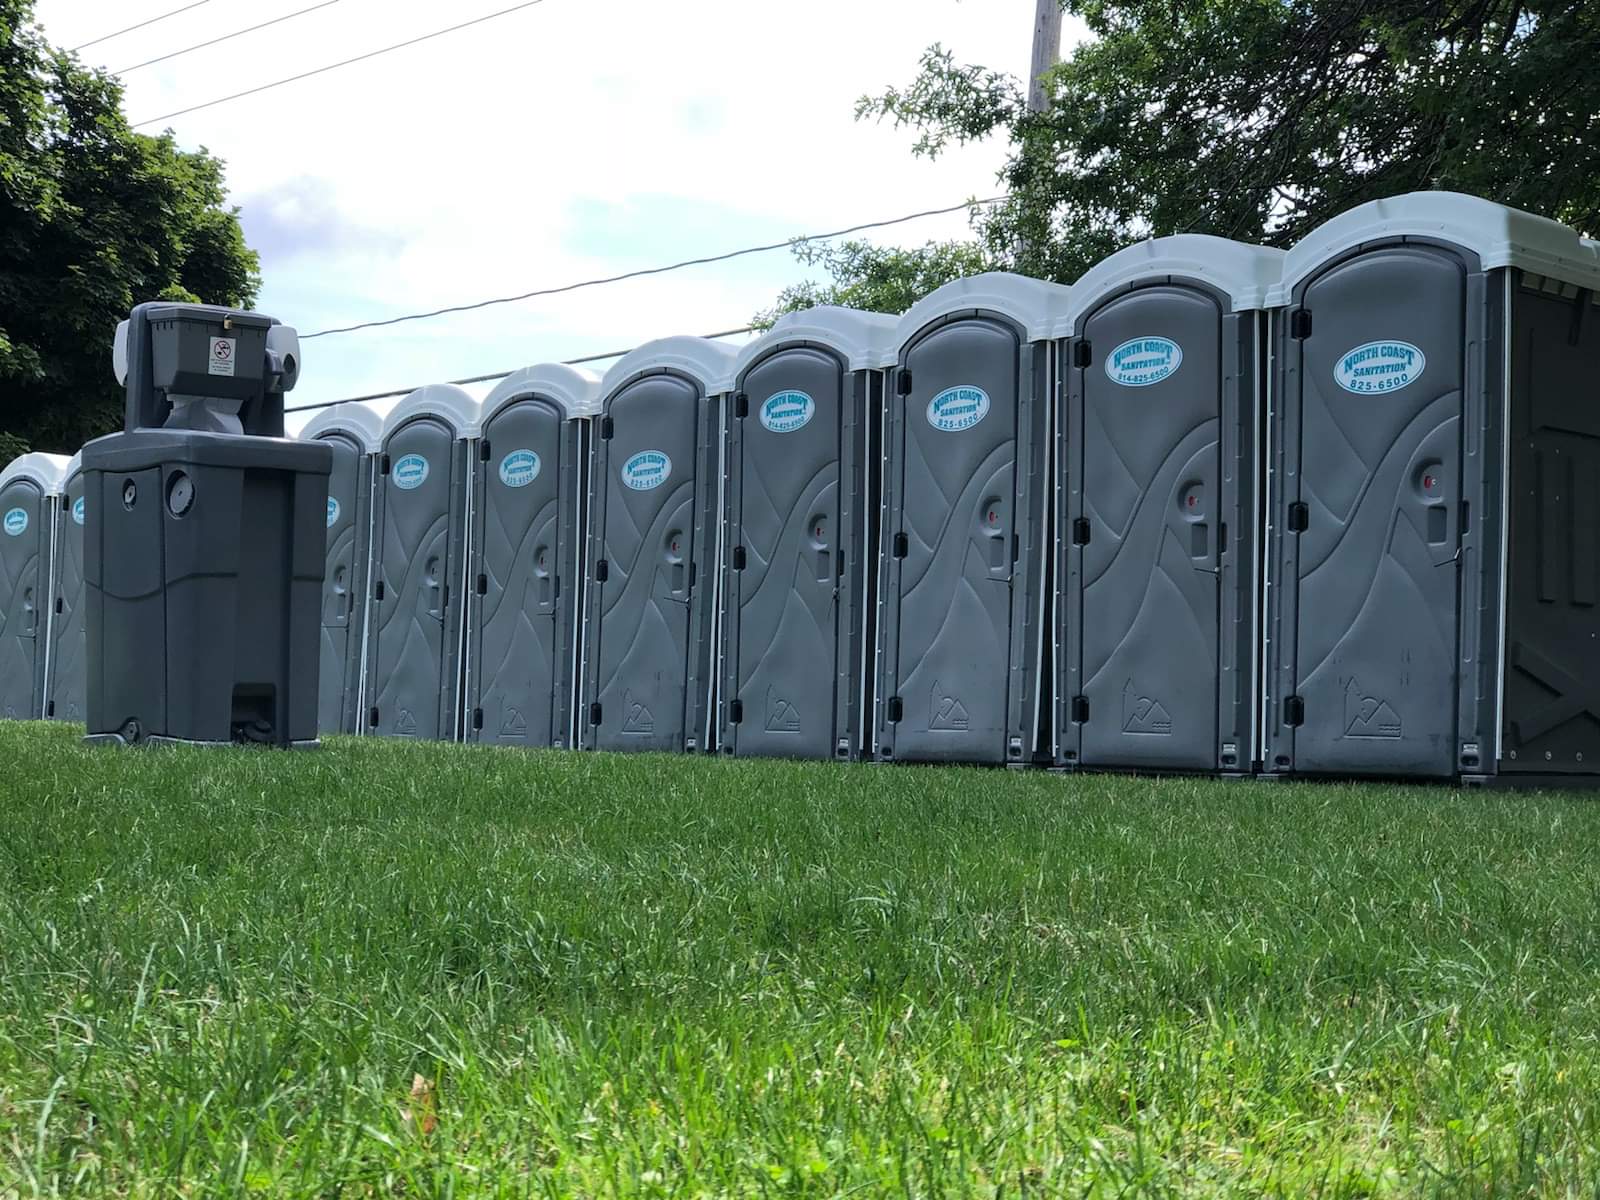 North Coast Sanitation in Erie PA provides porta potty rentals for the Discover Presque Isle Festival and other events on Presque Isle State Park and in Millcreek, PA.